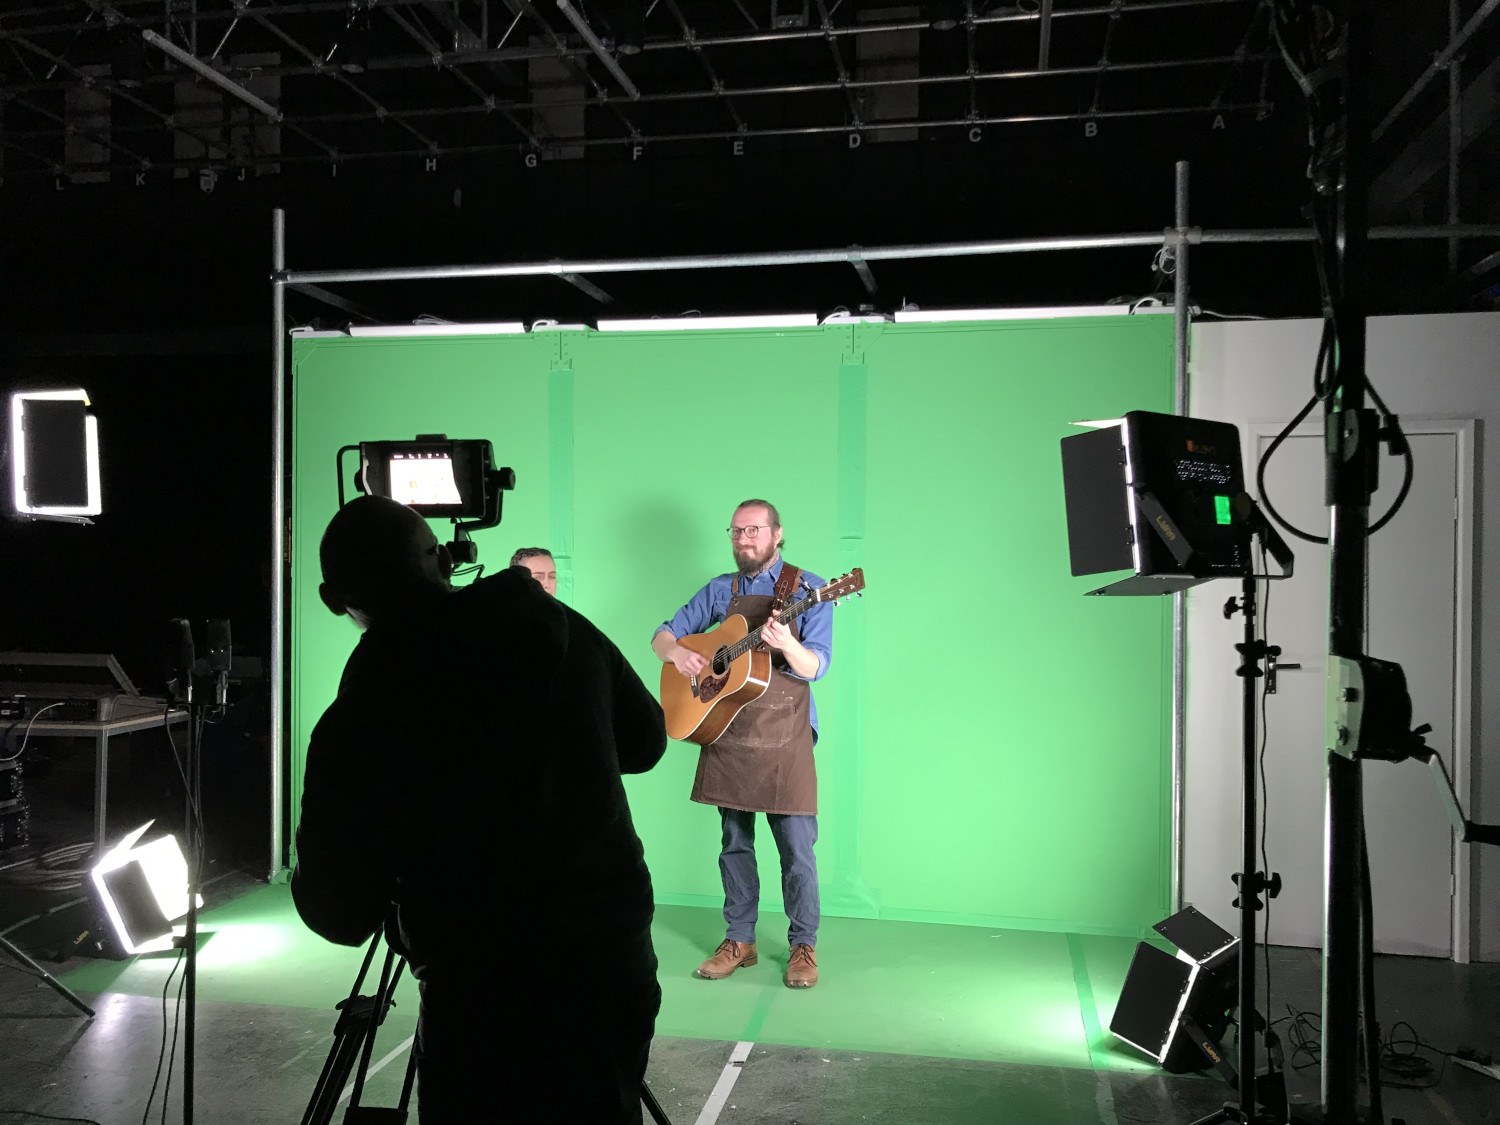 Person playing guitar standing in front of green screen while another person stands in front filming them with a camera on a tripod